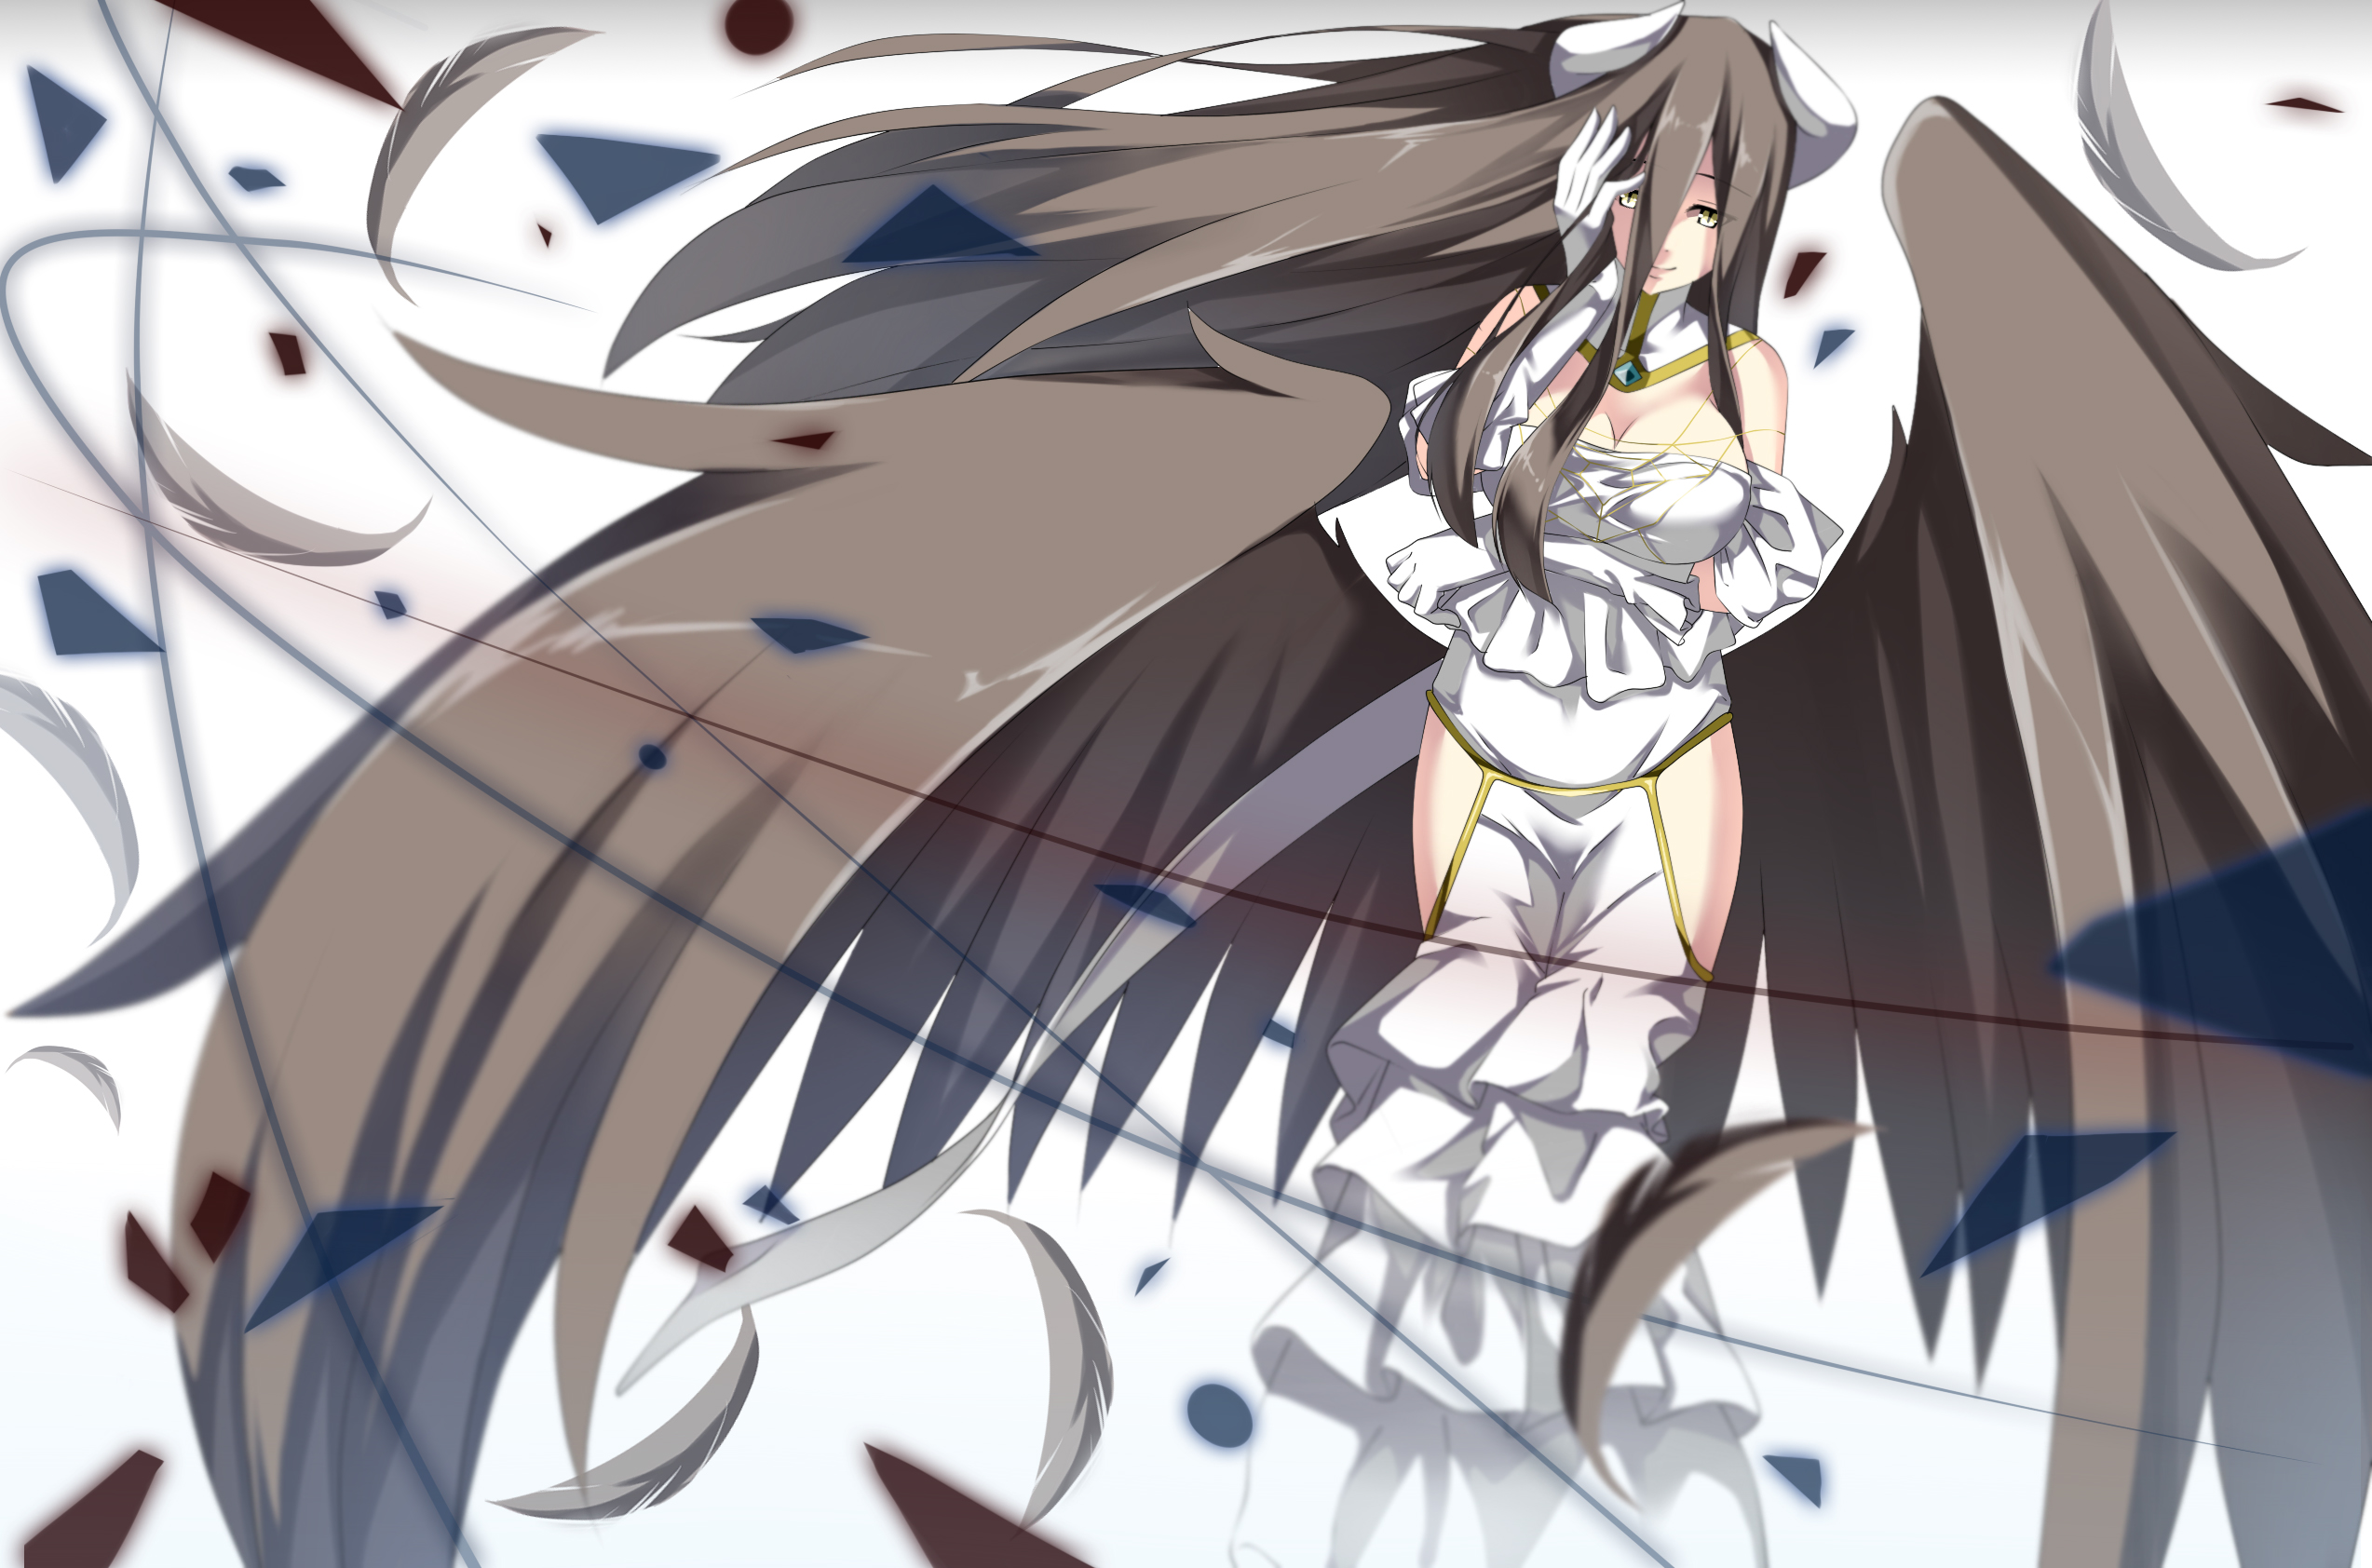 Free Download Anime Overlord Albedo Overlord Fond Dcran 2547x1684 For Your Desktop Mobile Tablet Explore 49 Overlord Anime Albedo Wallpaper Overlord Anime Albedo Wallpaper Overlord Albedo Wallpaper Albedo Overlord Wallpaper